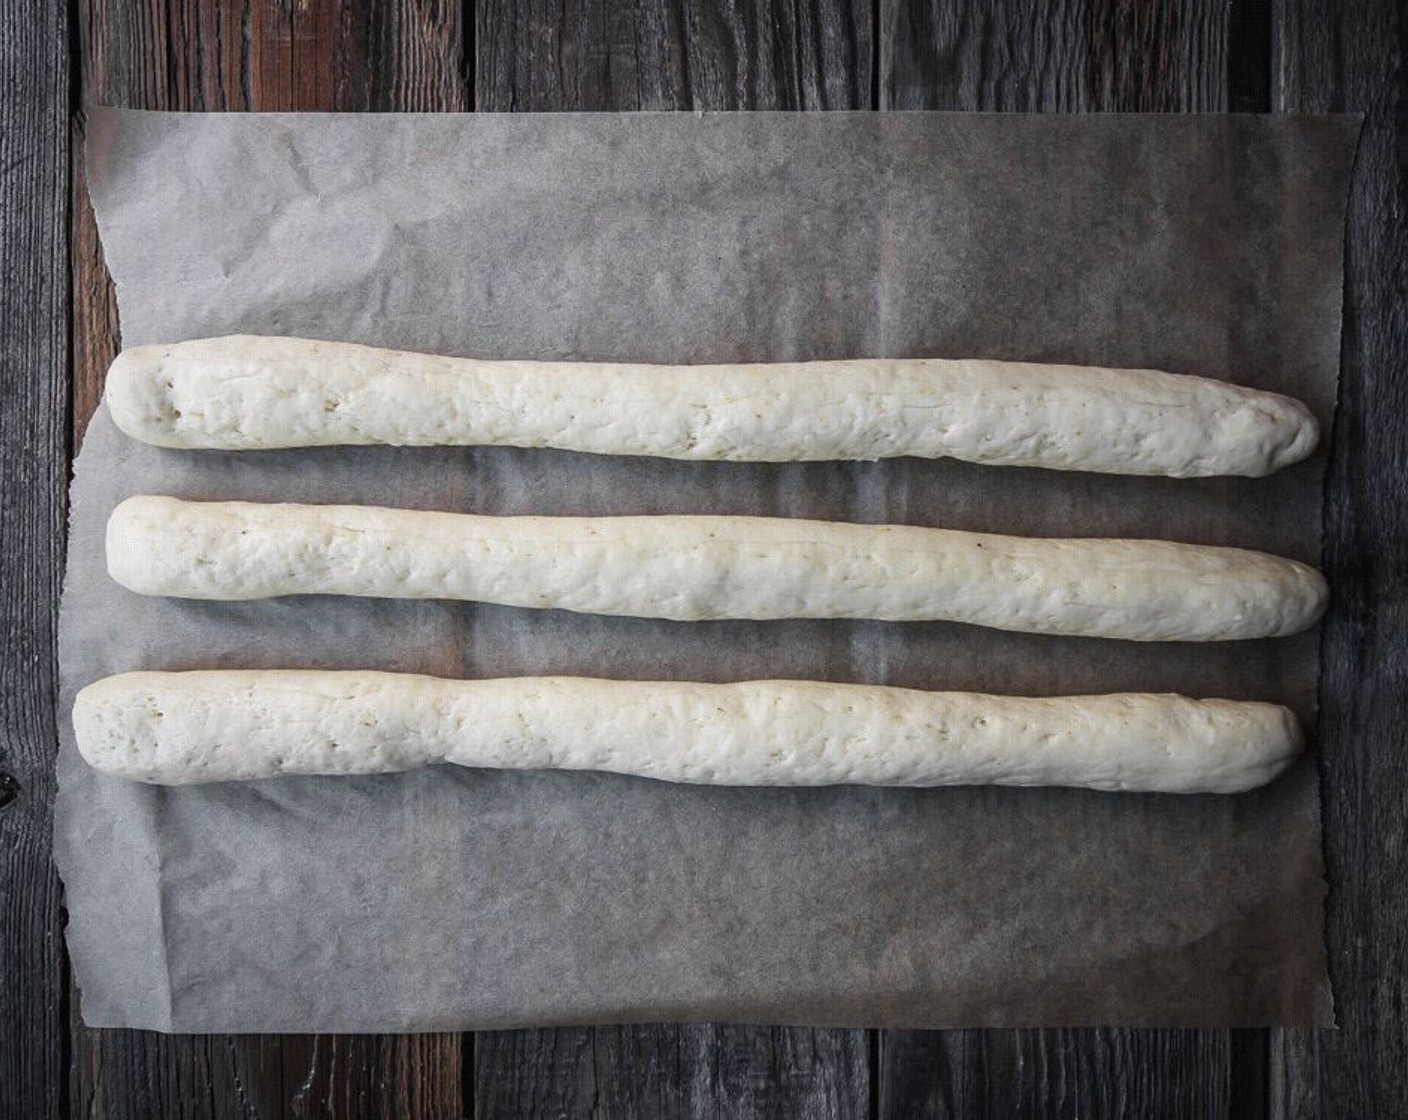 step 15 To make braided bread, divide the dough into three equally sized pieces (you can use a scale to get them identical). Shape each piece into an 18" long rope.